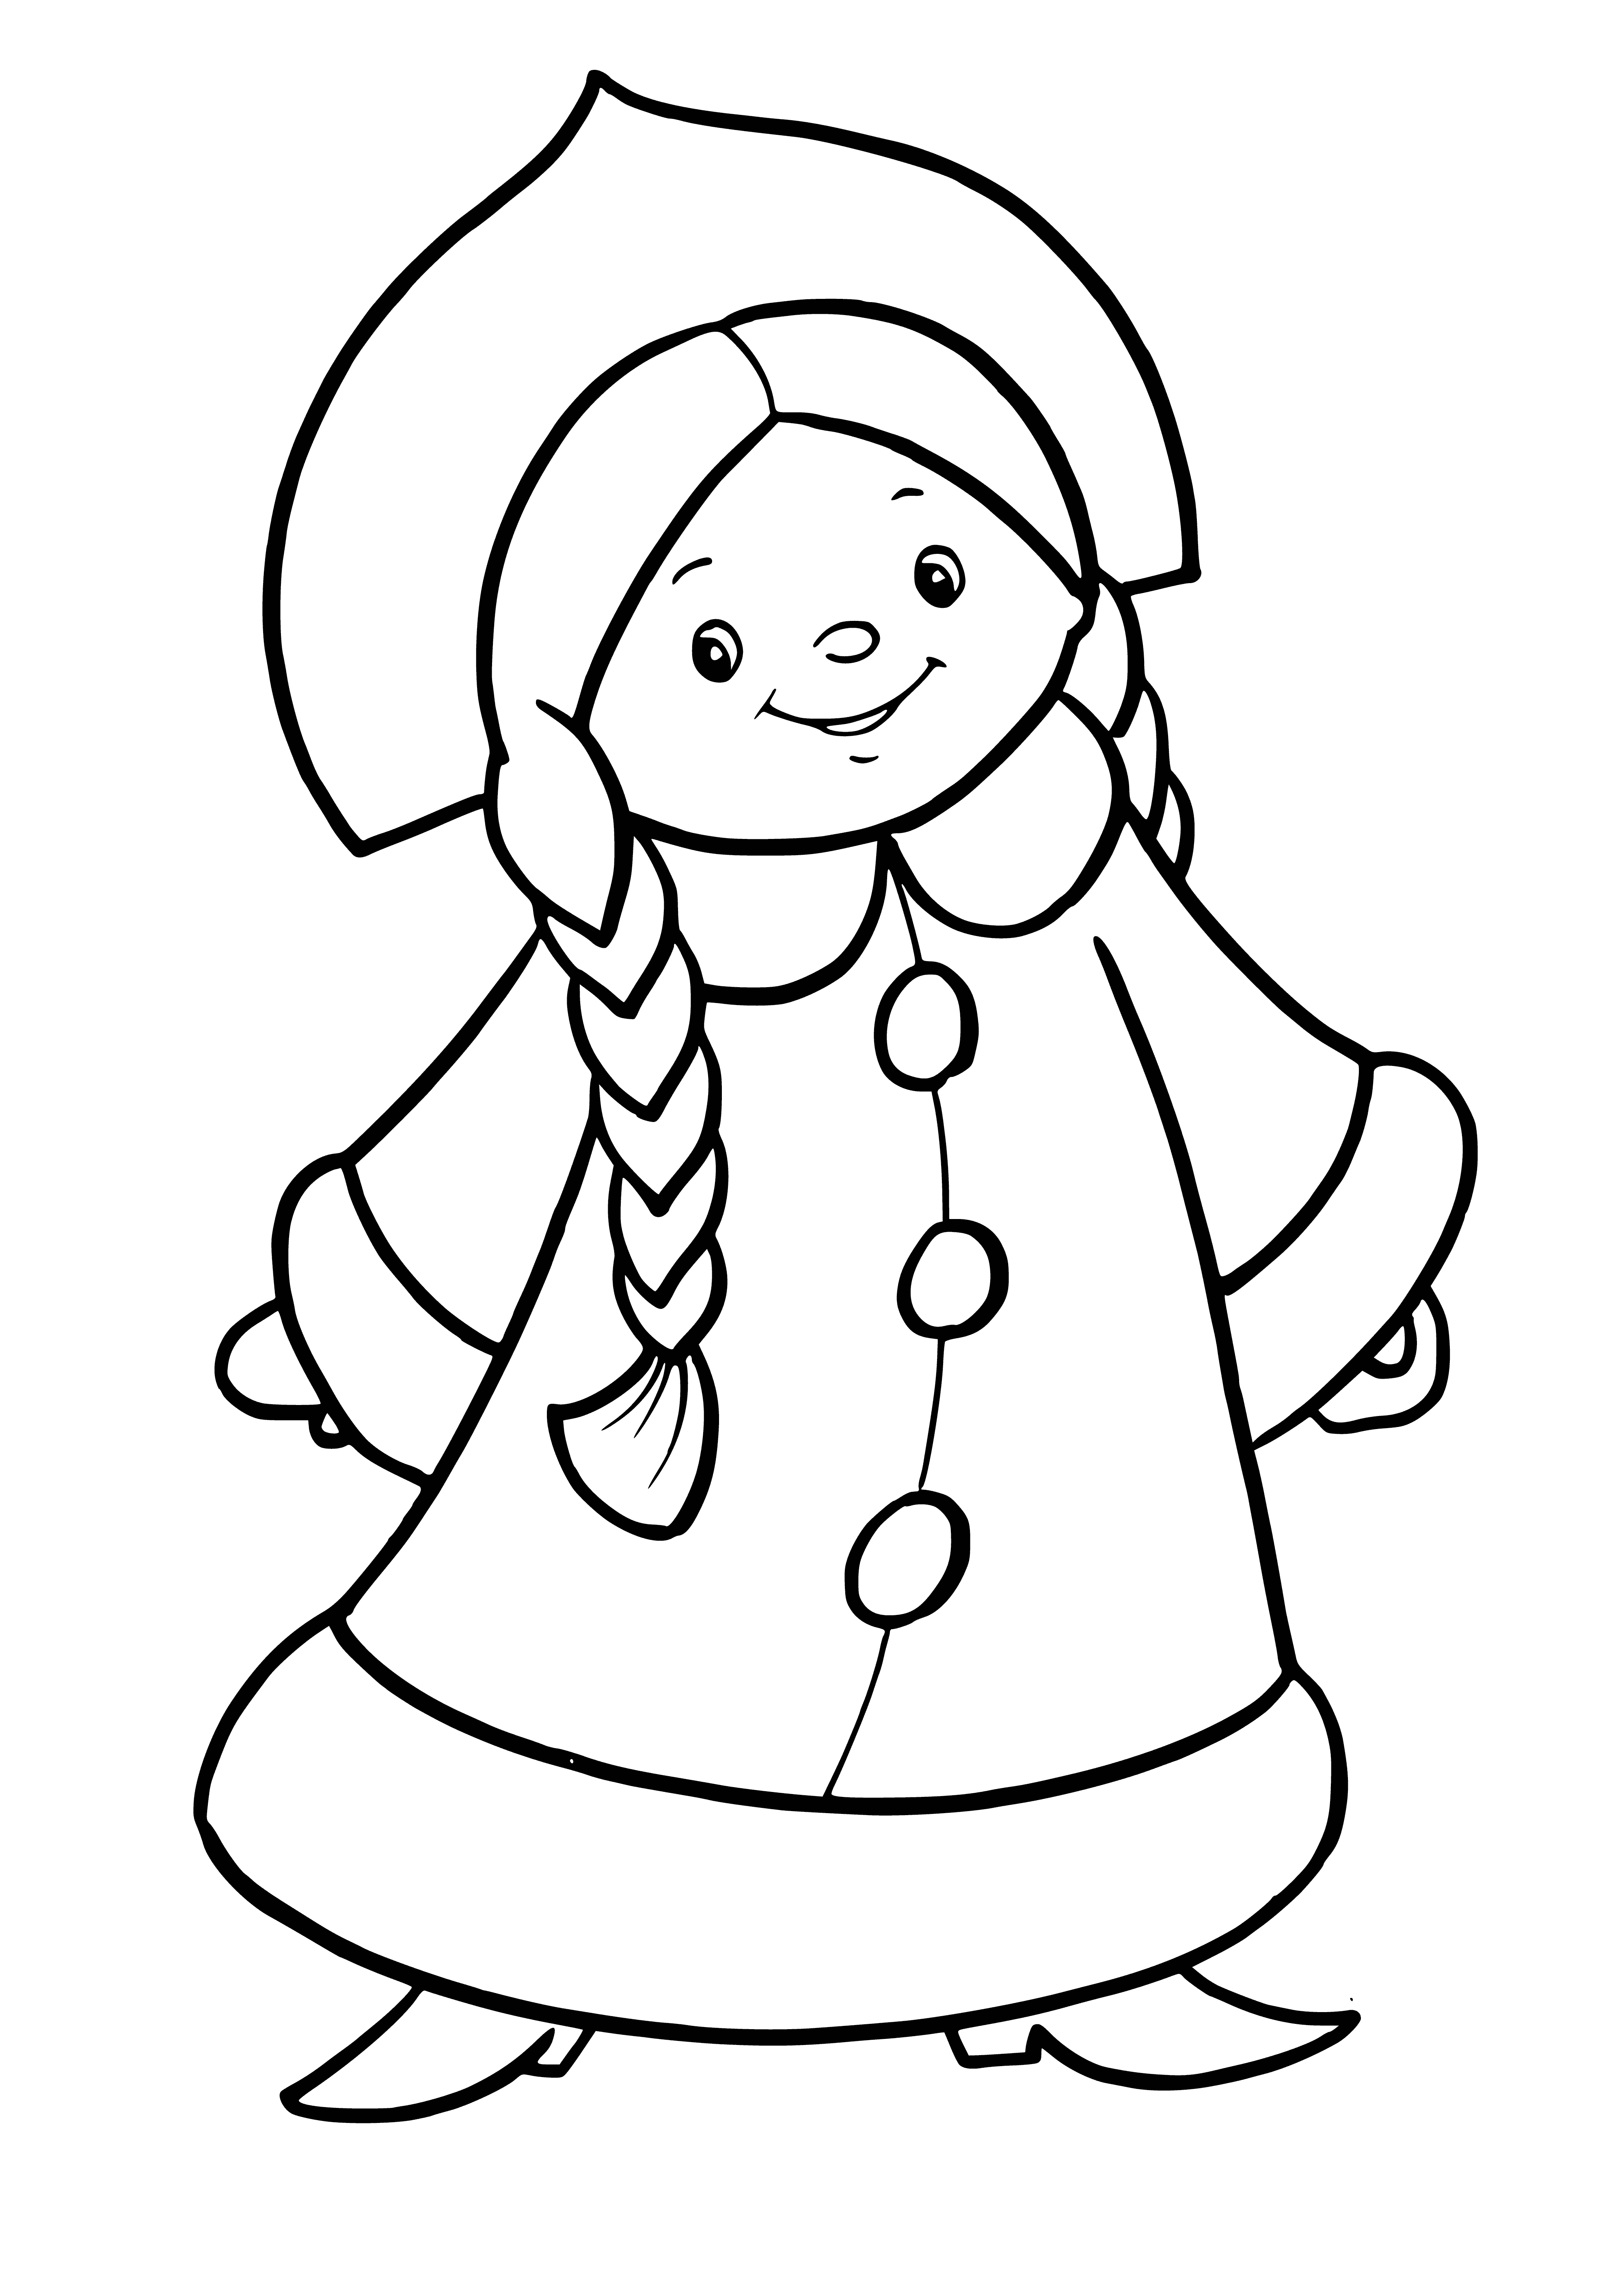 coloring page: Two snowmen of different sizes stand in a winter wonderland scene, one looking intimidating, the other hiding.